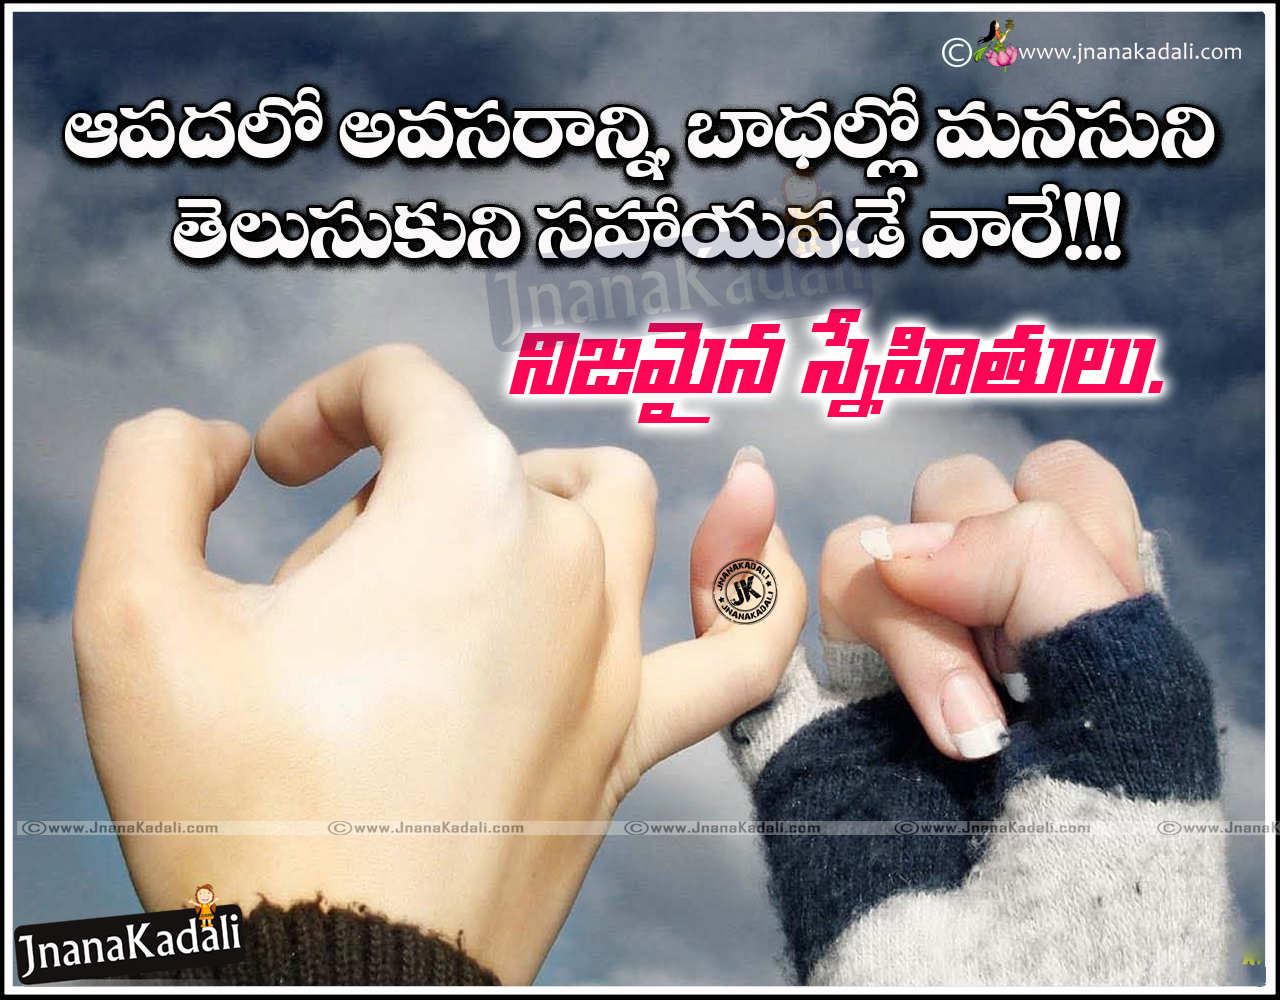 Beautiful Telugu Friendship Messages With Pictures Jnana Kadali